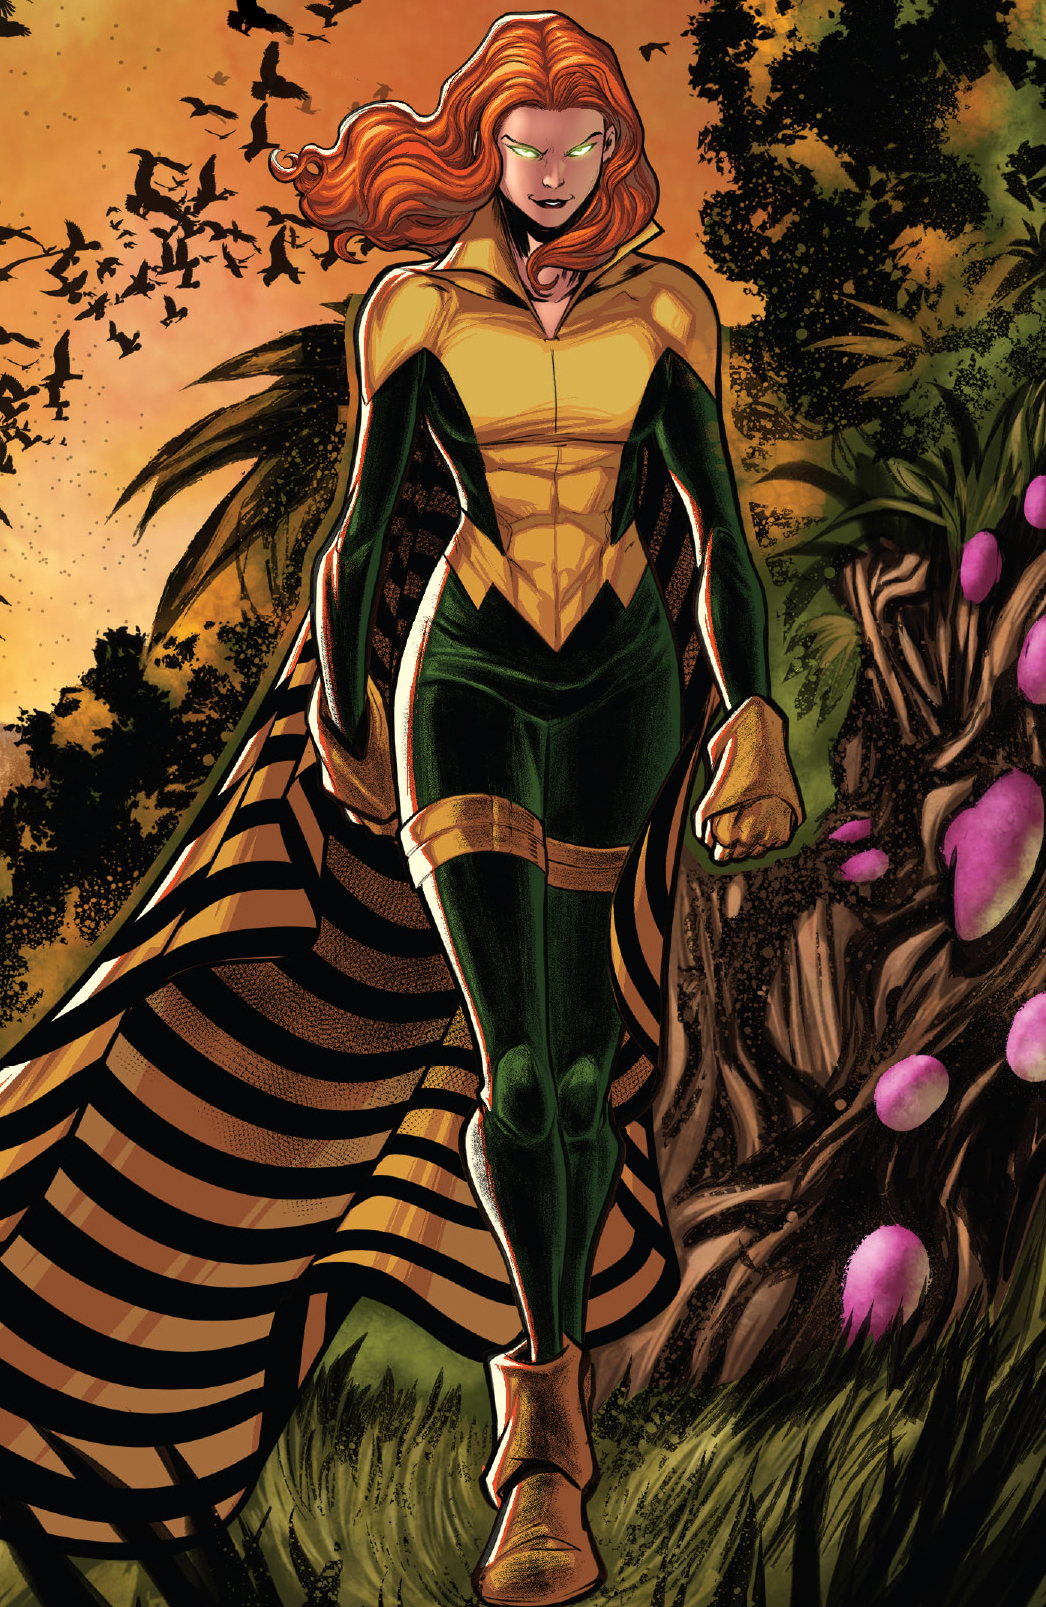 Theresa Cassidy approaches as Banshee. She is wearing the classic green and yellow costume complete with a black and yellow striped cape. Her eyes glow emerald. 